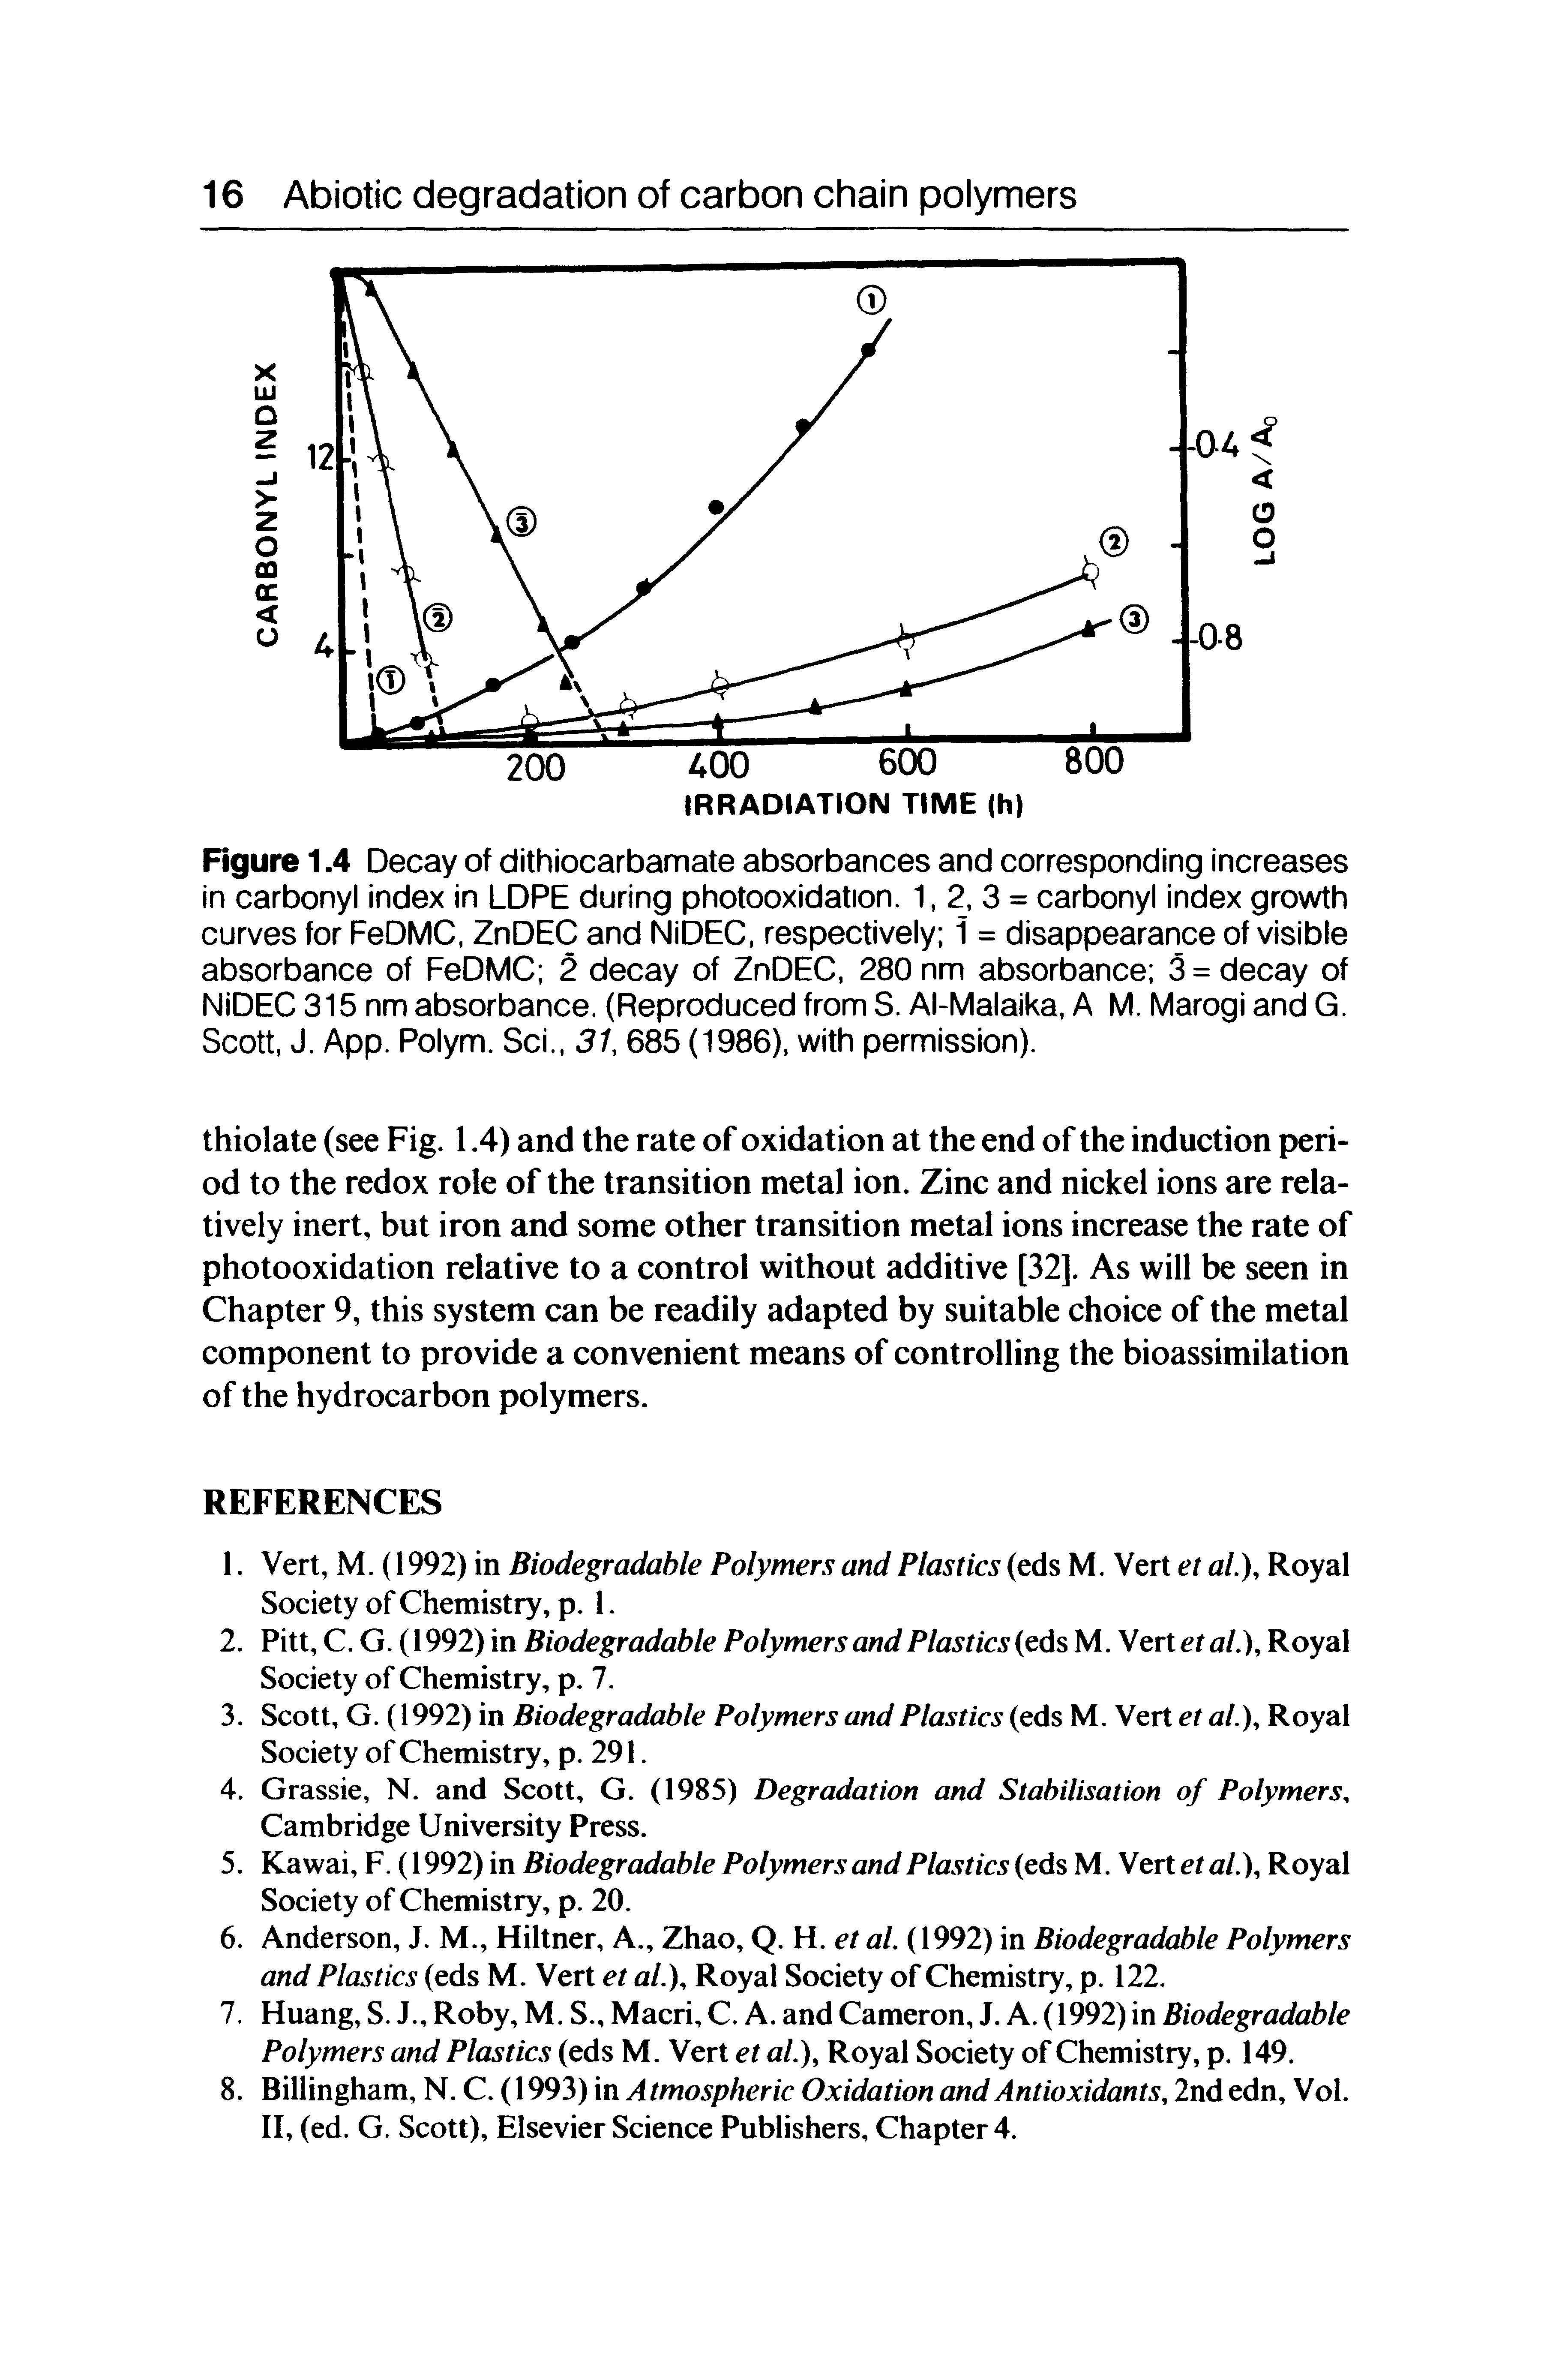 Figure 1.4 Decay of dithlocarbamate absorbances and corresponding increases in carbonyl index in LDPE during photooxidation. 1, 2, 3 = carbonyl index growth curves for FeDMC, ZnDEC and NiDEC, respectively i = disappearance of visible absorbance of FeDMC 2 decay of ZnDEC, 280 nm absorbance 3 = decay of NiDEC 315 nm absorbance. (Reproduced from S. Al-Malaika, A M. Marogi and G. Scott, J. App. Polym. Sci., 31, 685 (1986), with permission).